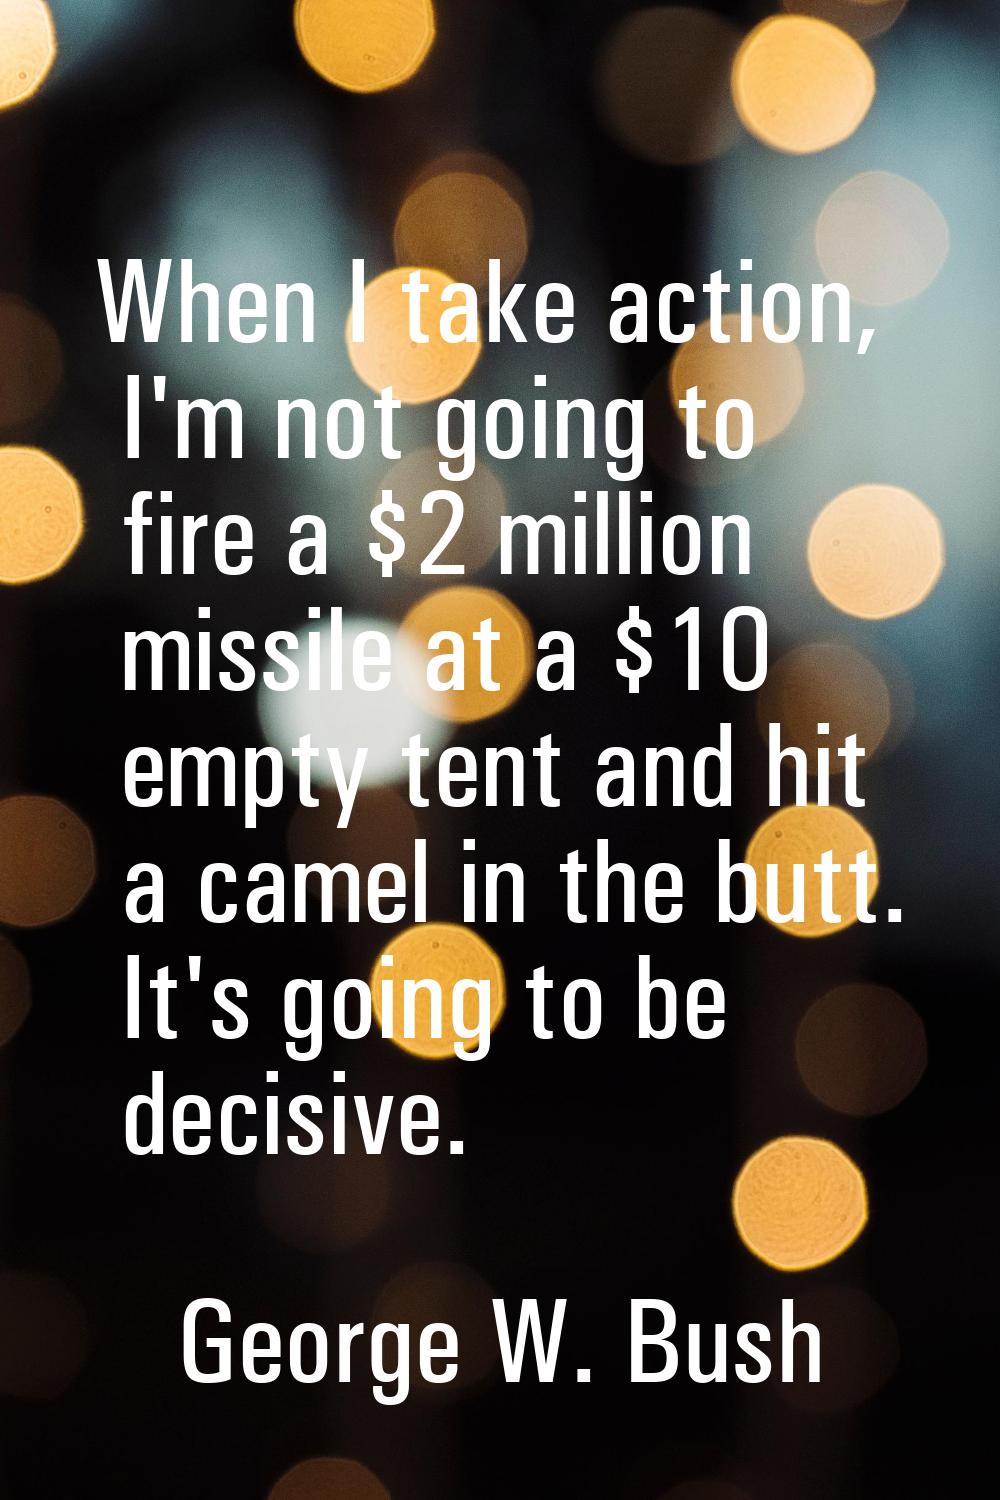 When I take action, I'm not going to fire a $2 million missile at a $10 empty tent and hit a camel 